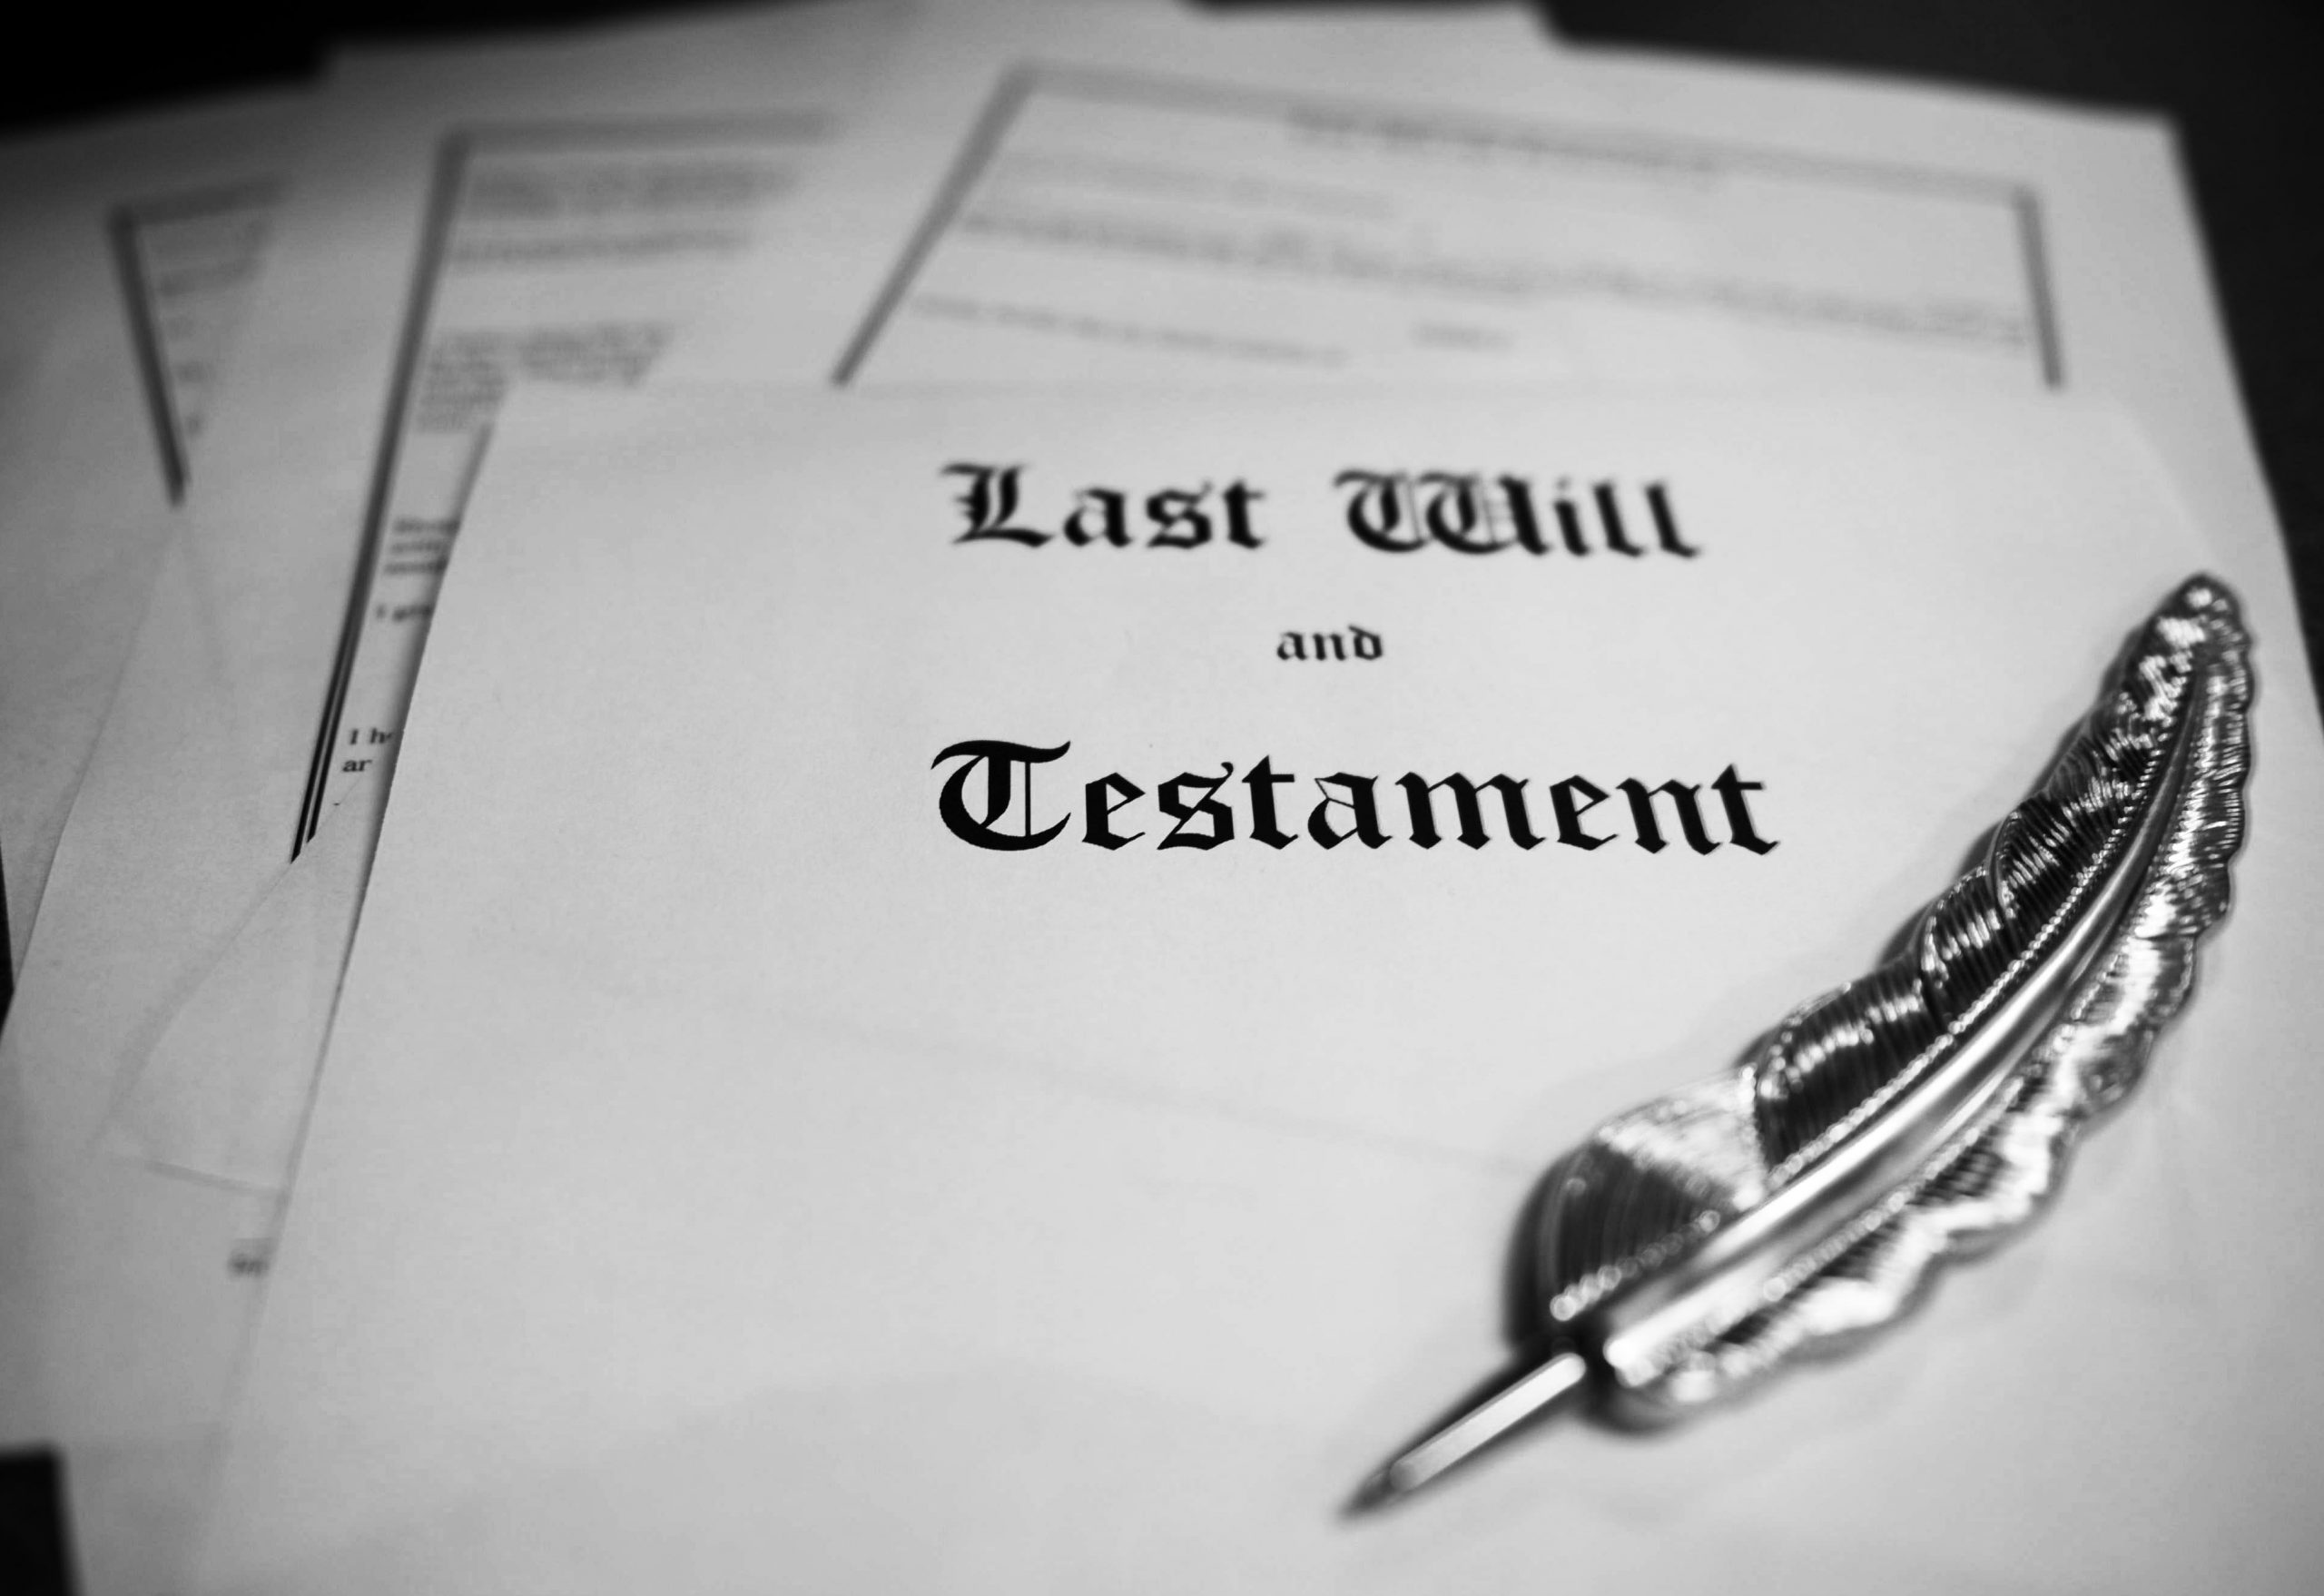 Unsent text on mobile counts as a will, Queensland court finds